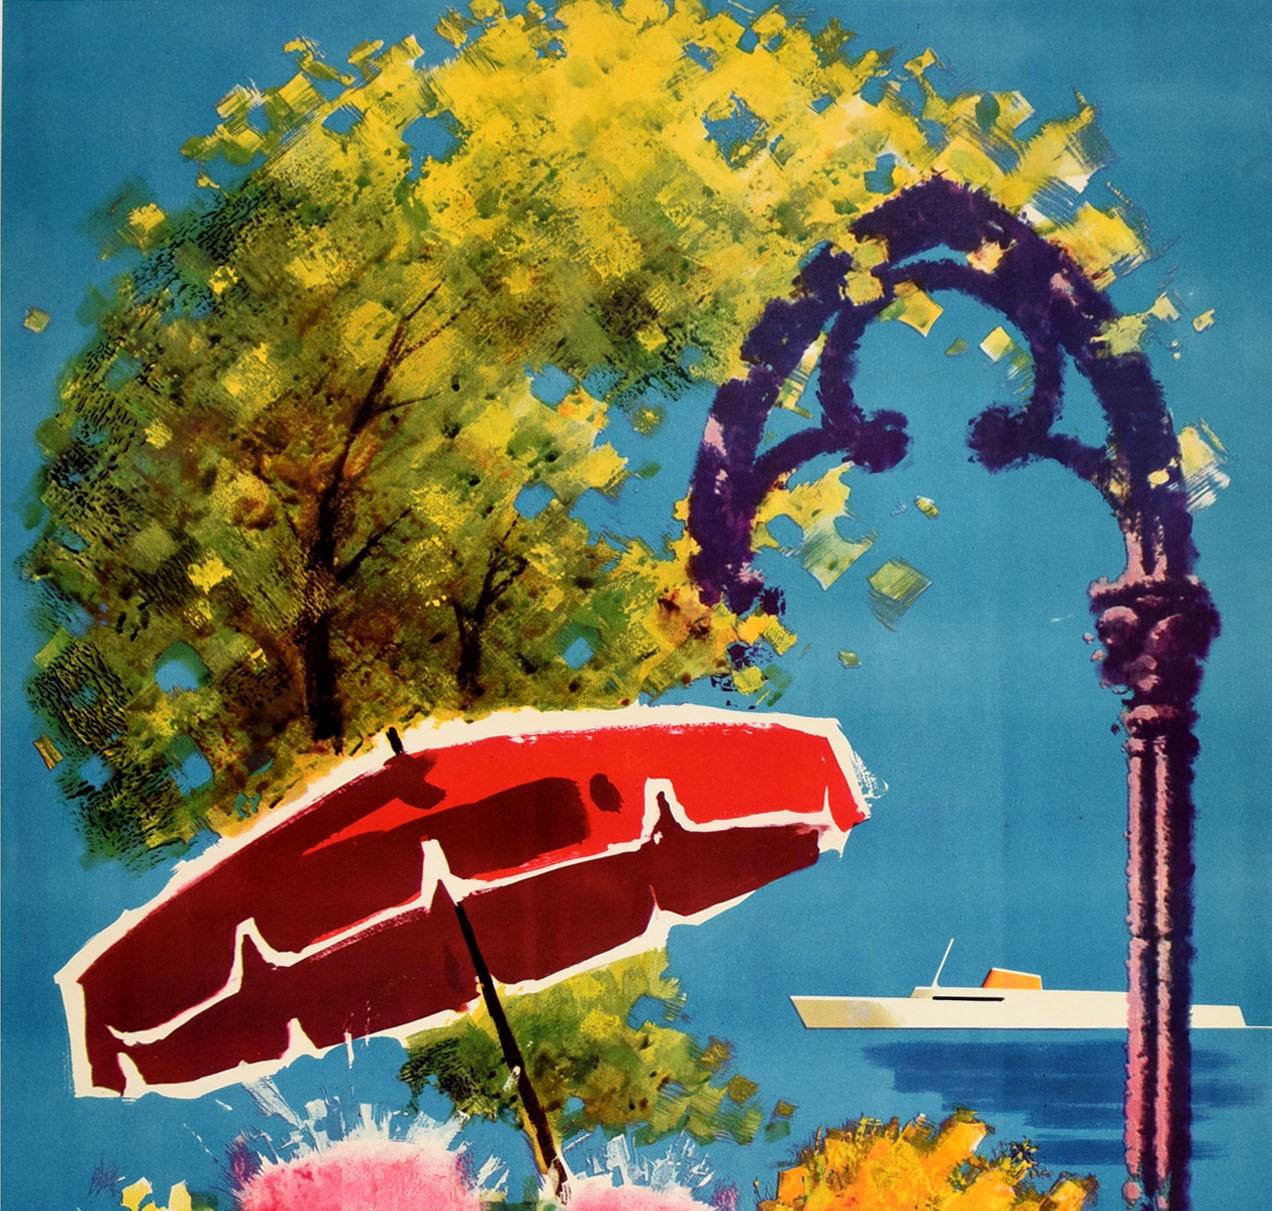 Original vintage travel poster for Barcelona issued by the Municipal Office of Tourism and Information featuring colourful artwork depicting a red sun umbrella above flowers in front of a tree with a sleek white ship on the blue water in the